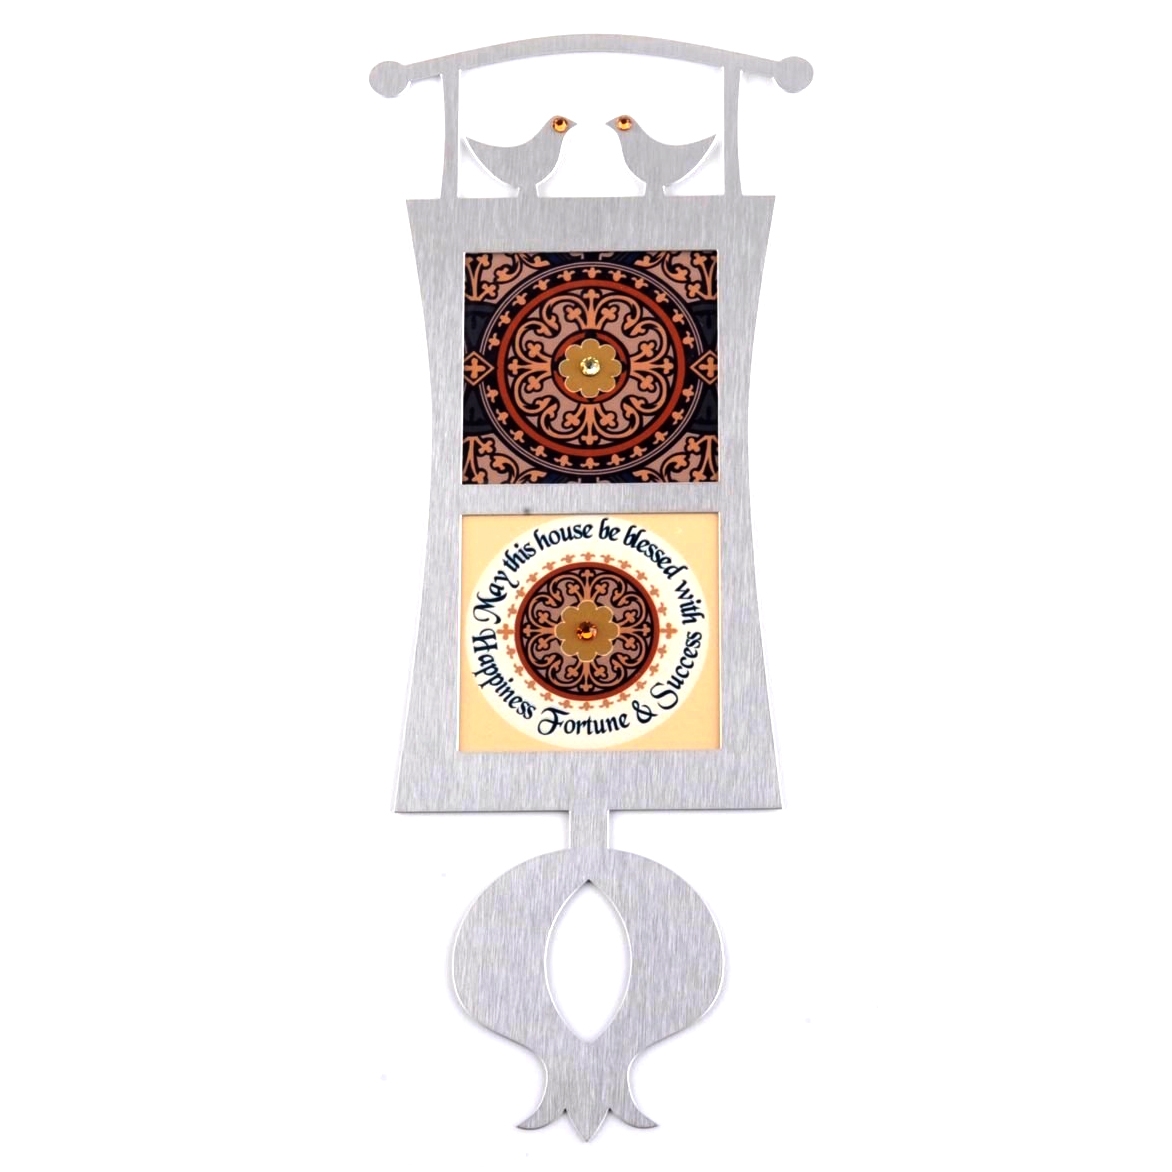 Dorit Judaica Moroccan-Style Dove Perch Wall Hanging  with Home Blessing - 1